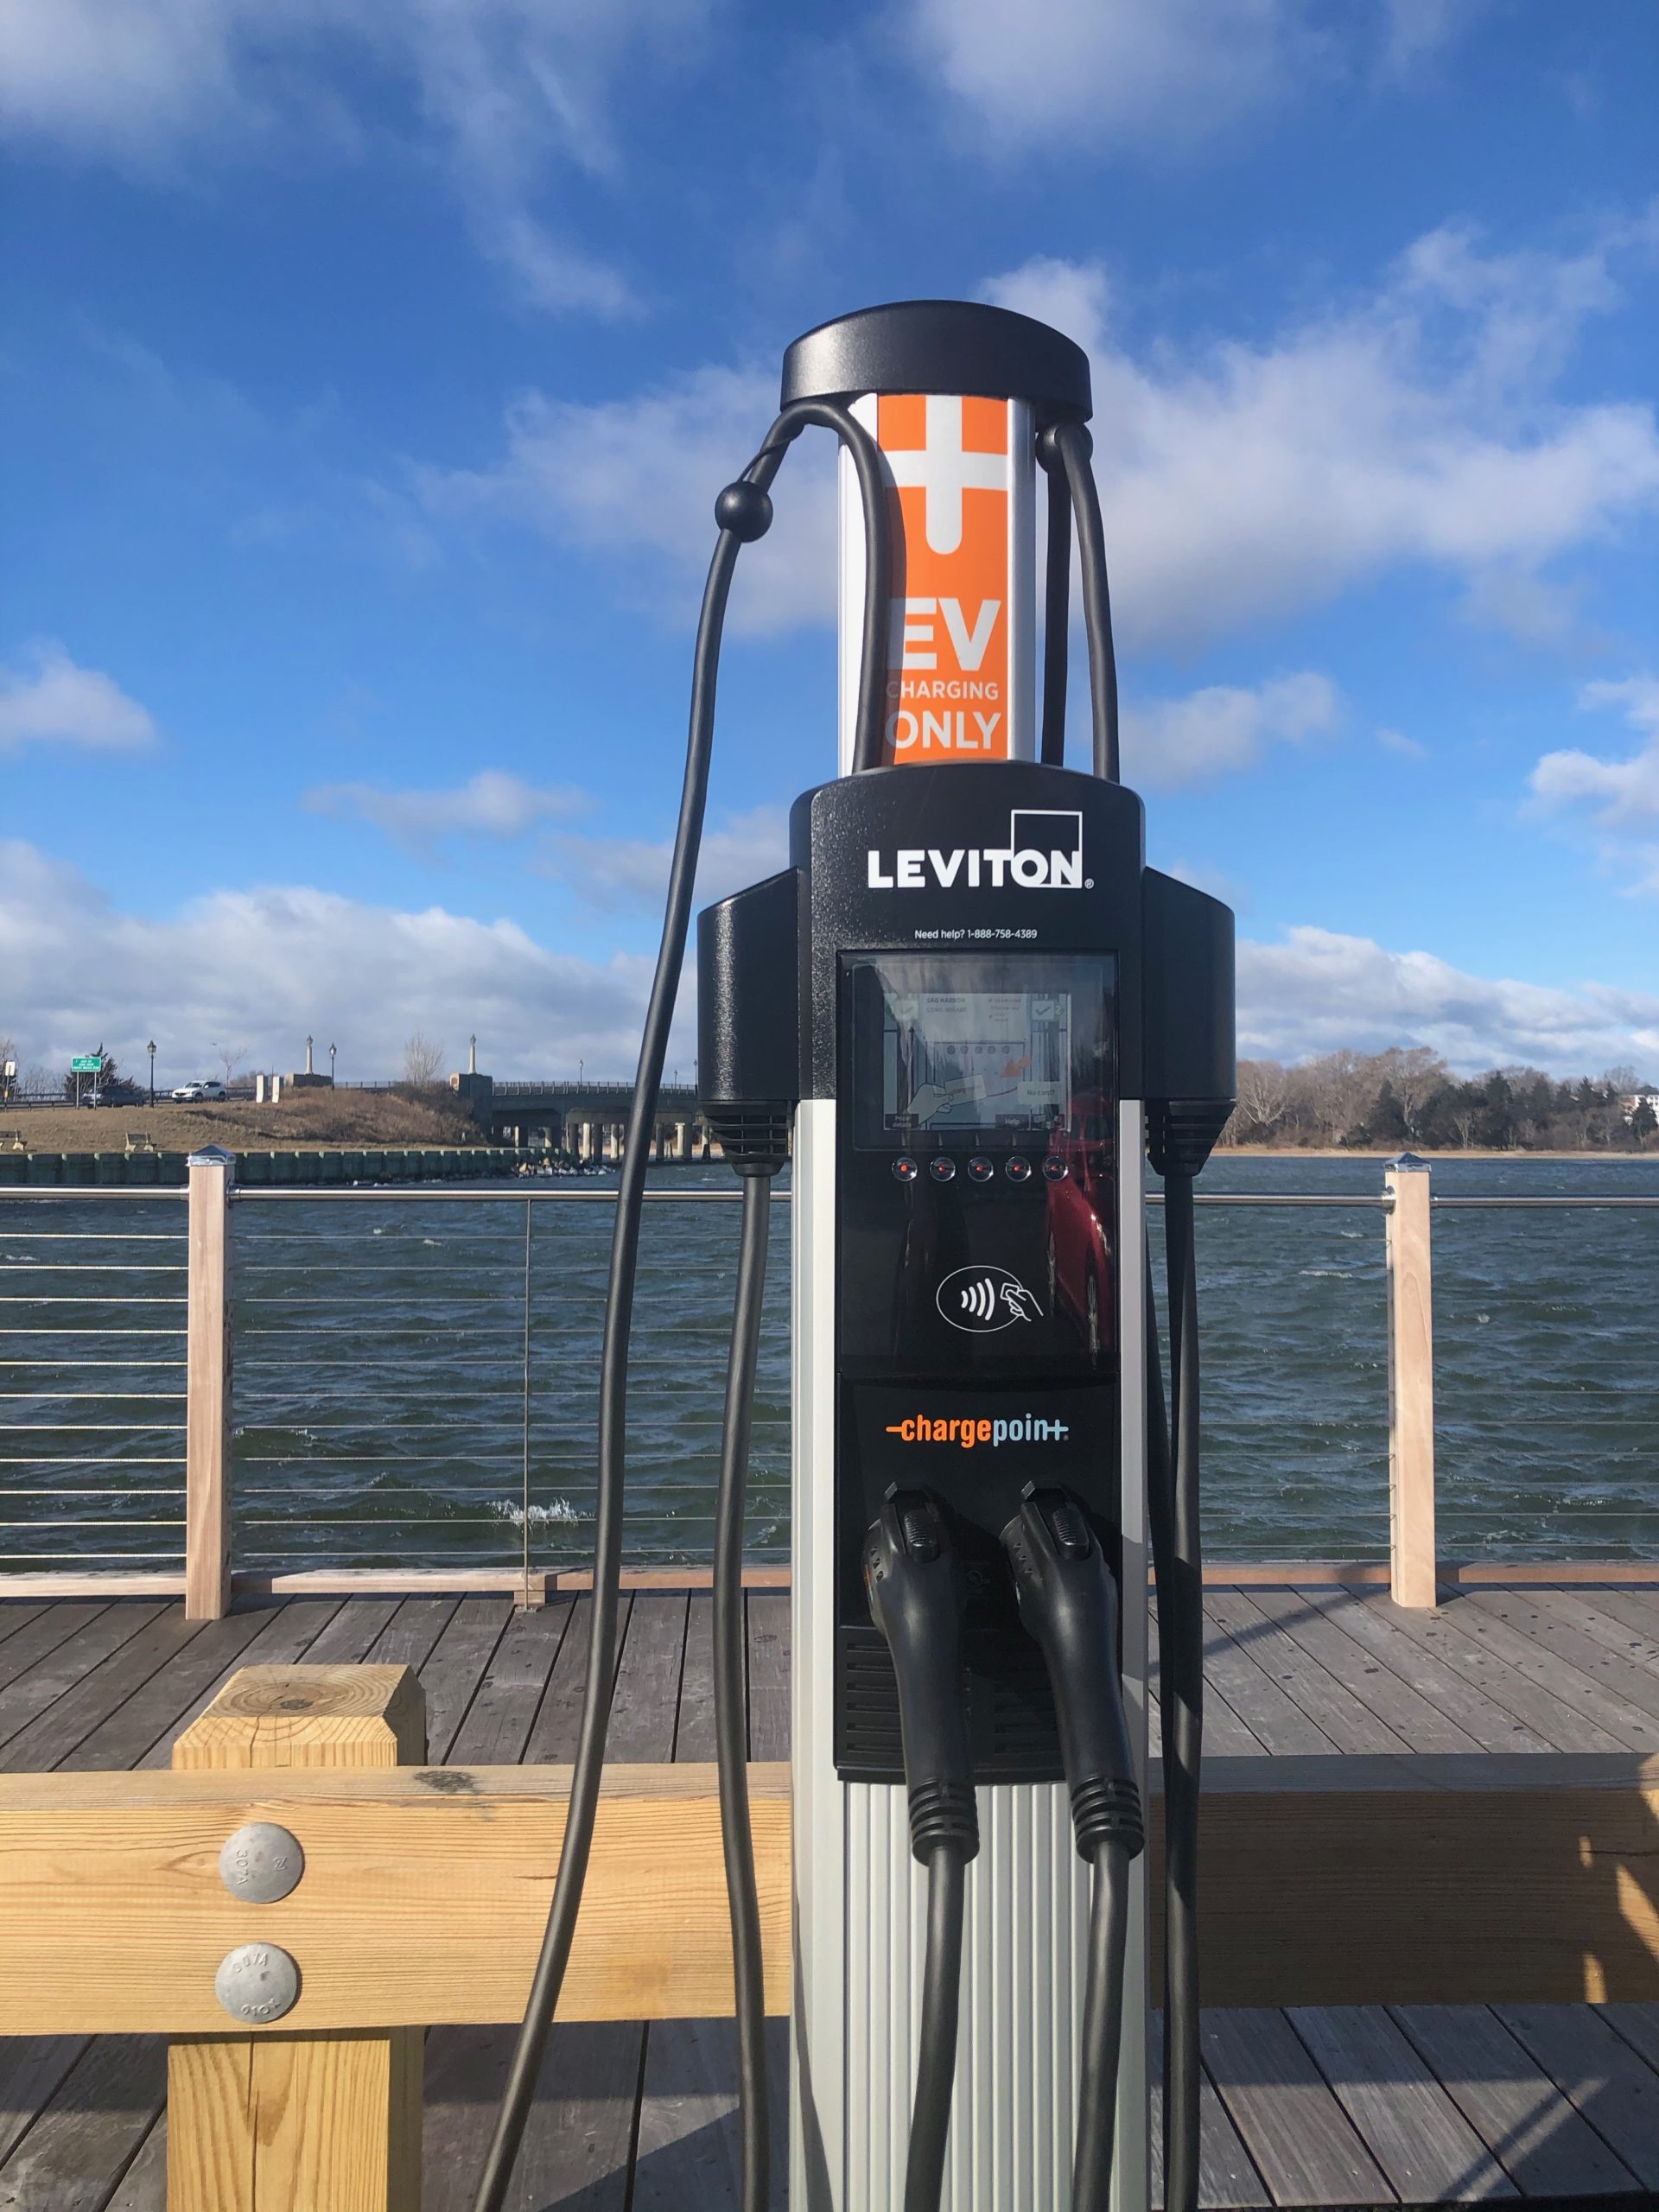 Suffolk County has 492 public charging ports like this one on Long Wharf in Sag Harbor.